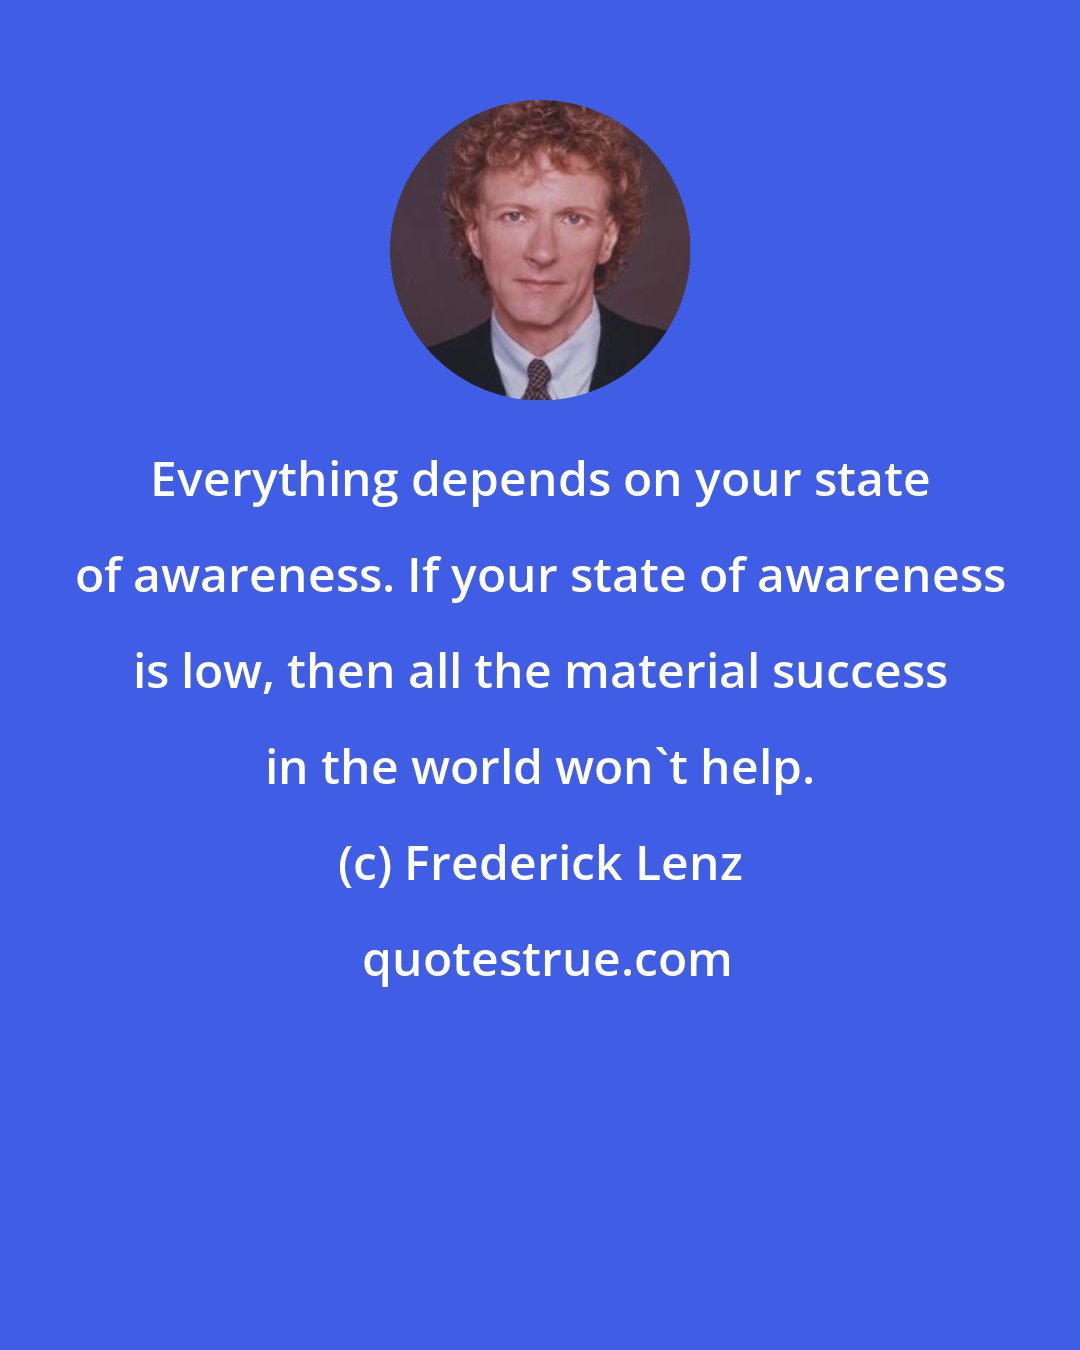 Frederick Lenz: Everything depends on your state of awareness. If your state of awareness is low, then all the material success in the world won't help.